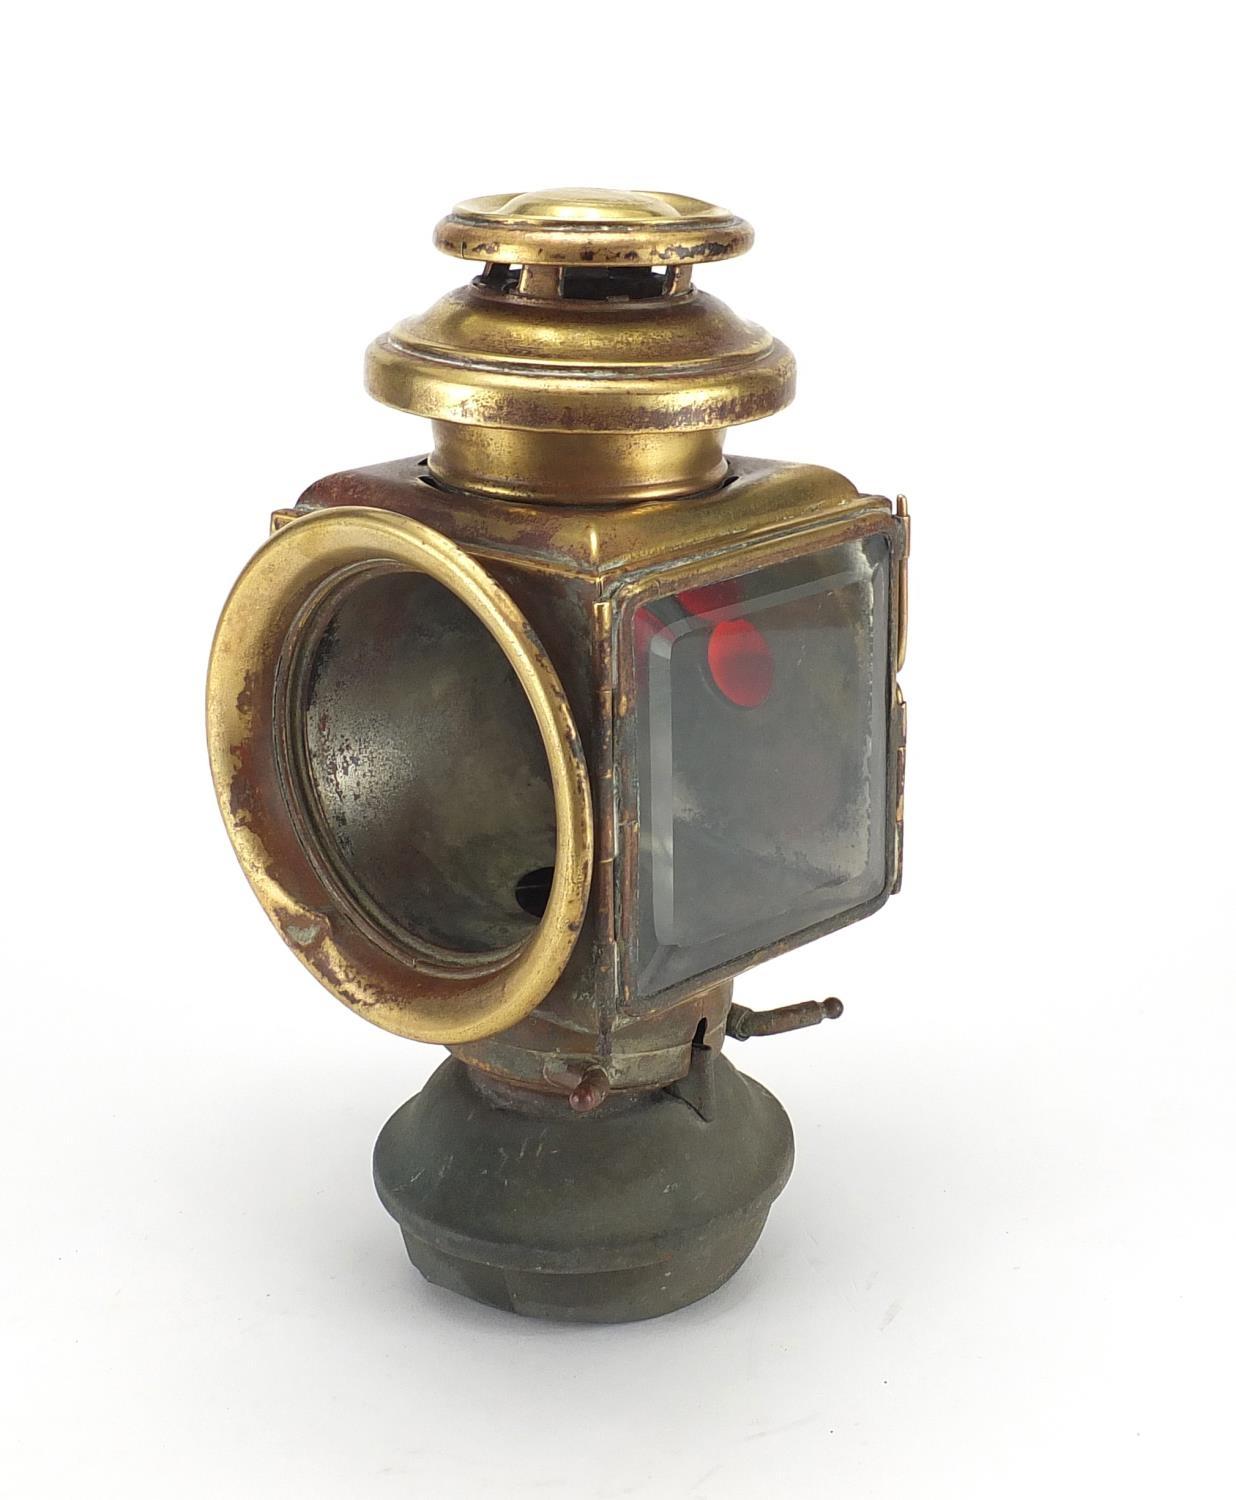 1920's lantern taken from a Ford model T, with glass panels, 28cm high : For further condition